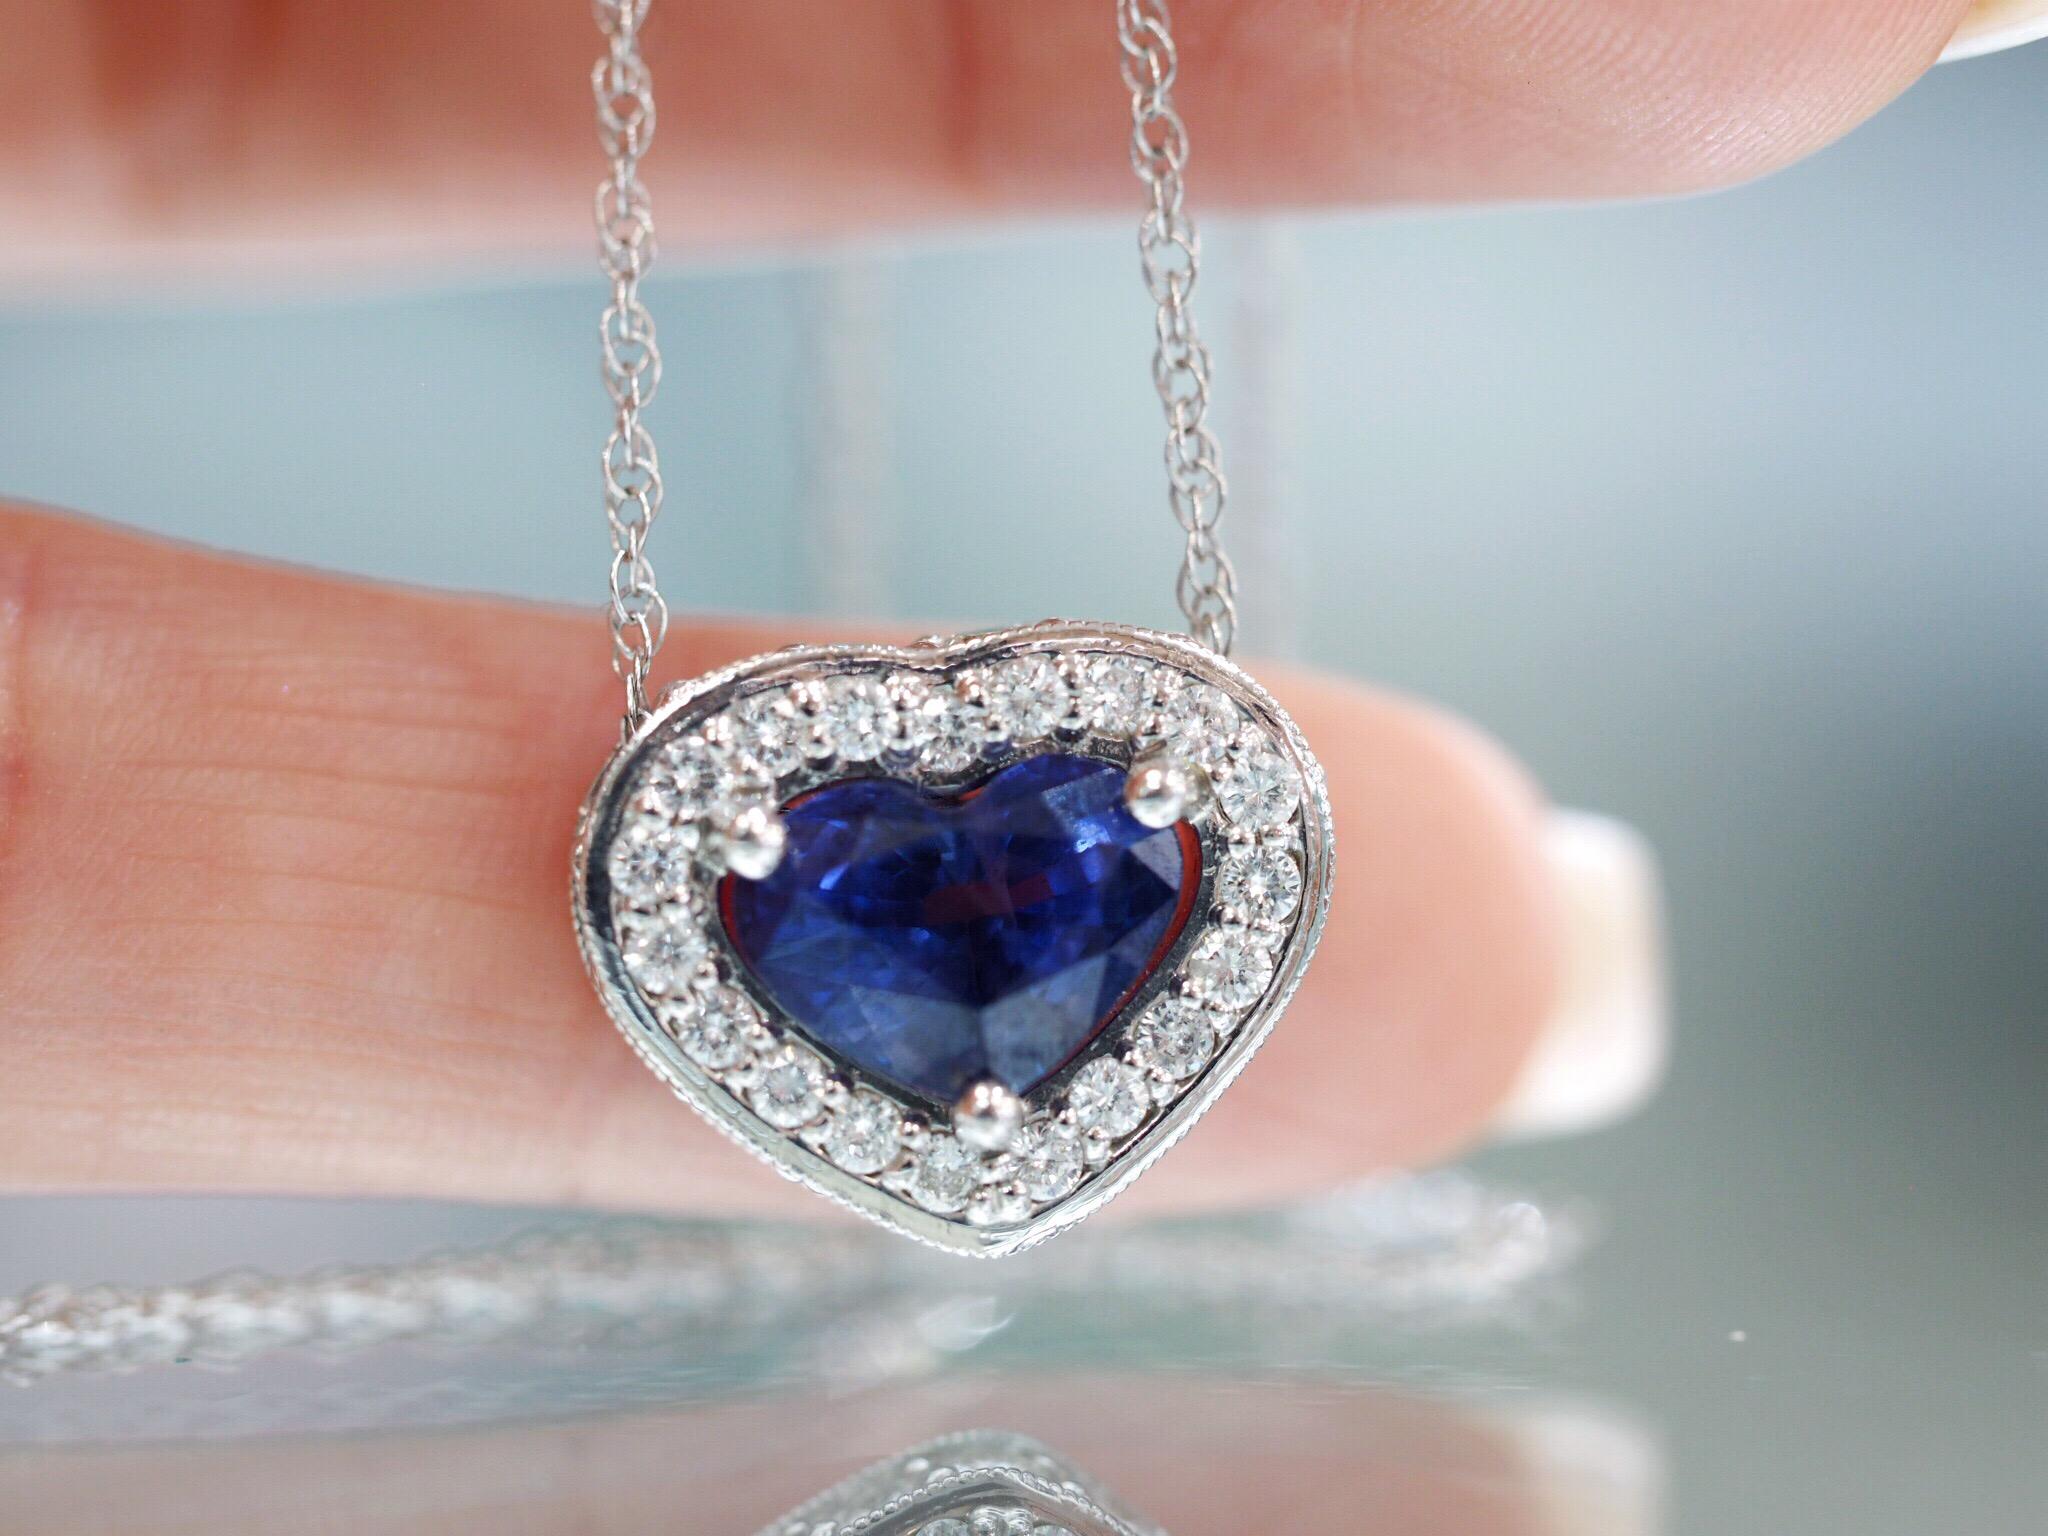 Stunning 1.89CT natural blue sapphire heart is set in a custom made diamond halo pendant. The Diamonds surround the center in a beautiful halo, also flowing on the outer side facing outwards giving the maximum brilliance at every angle. The pendant